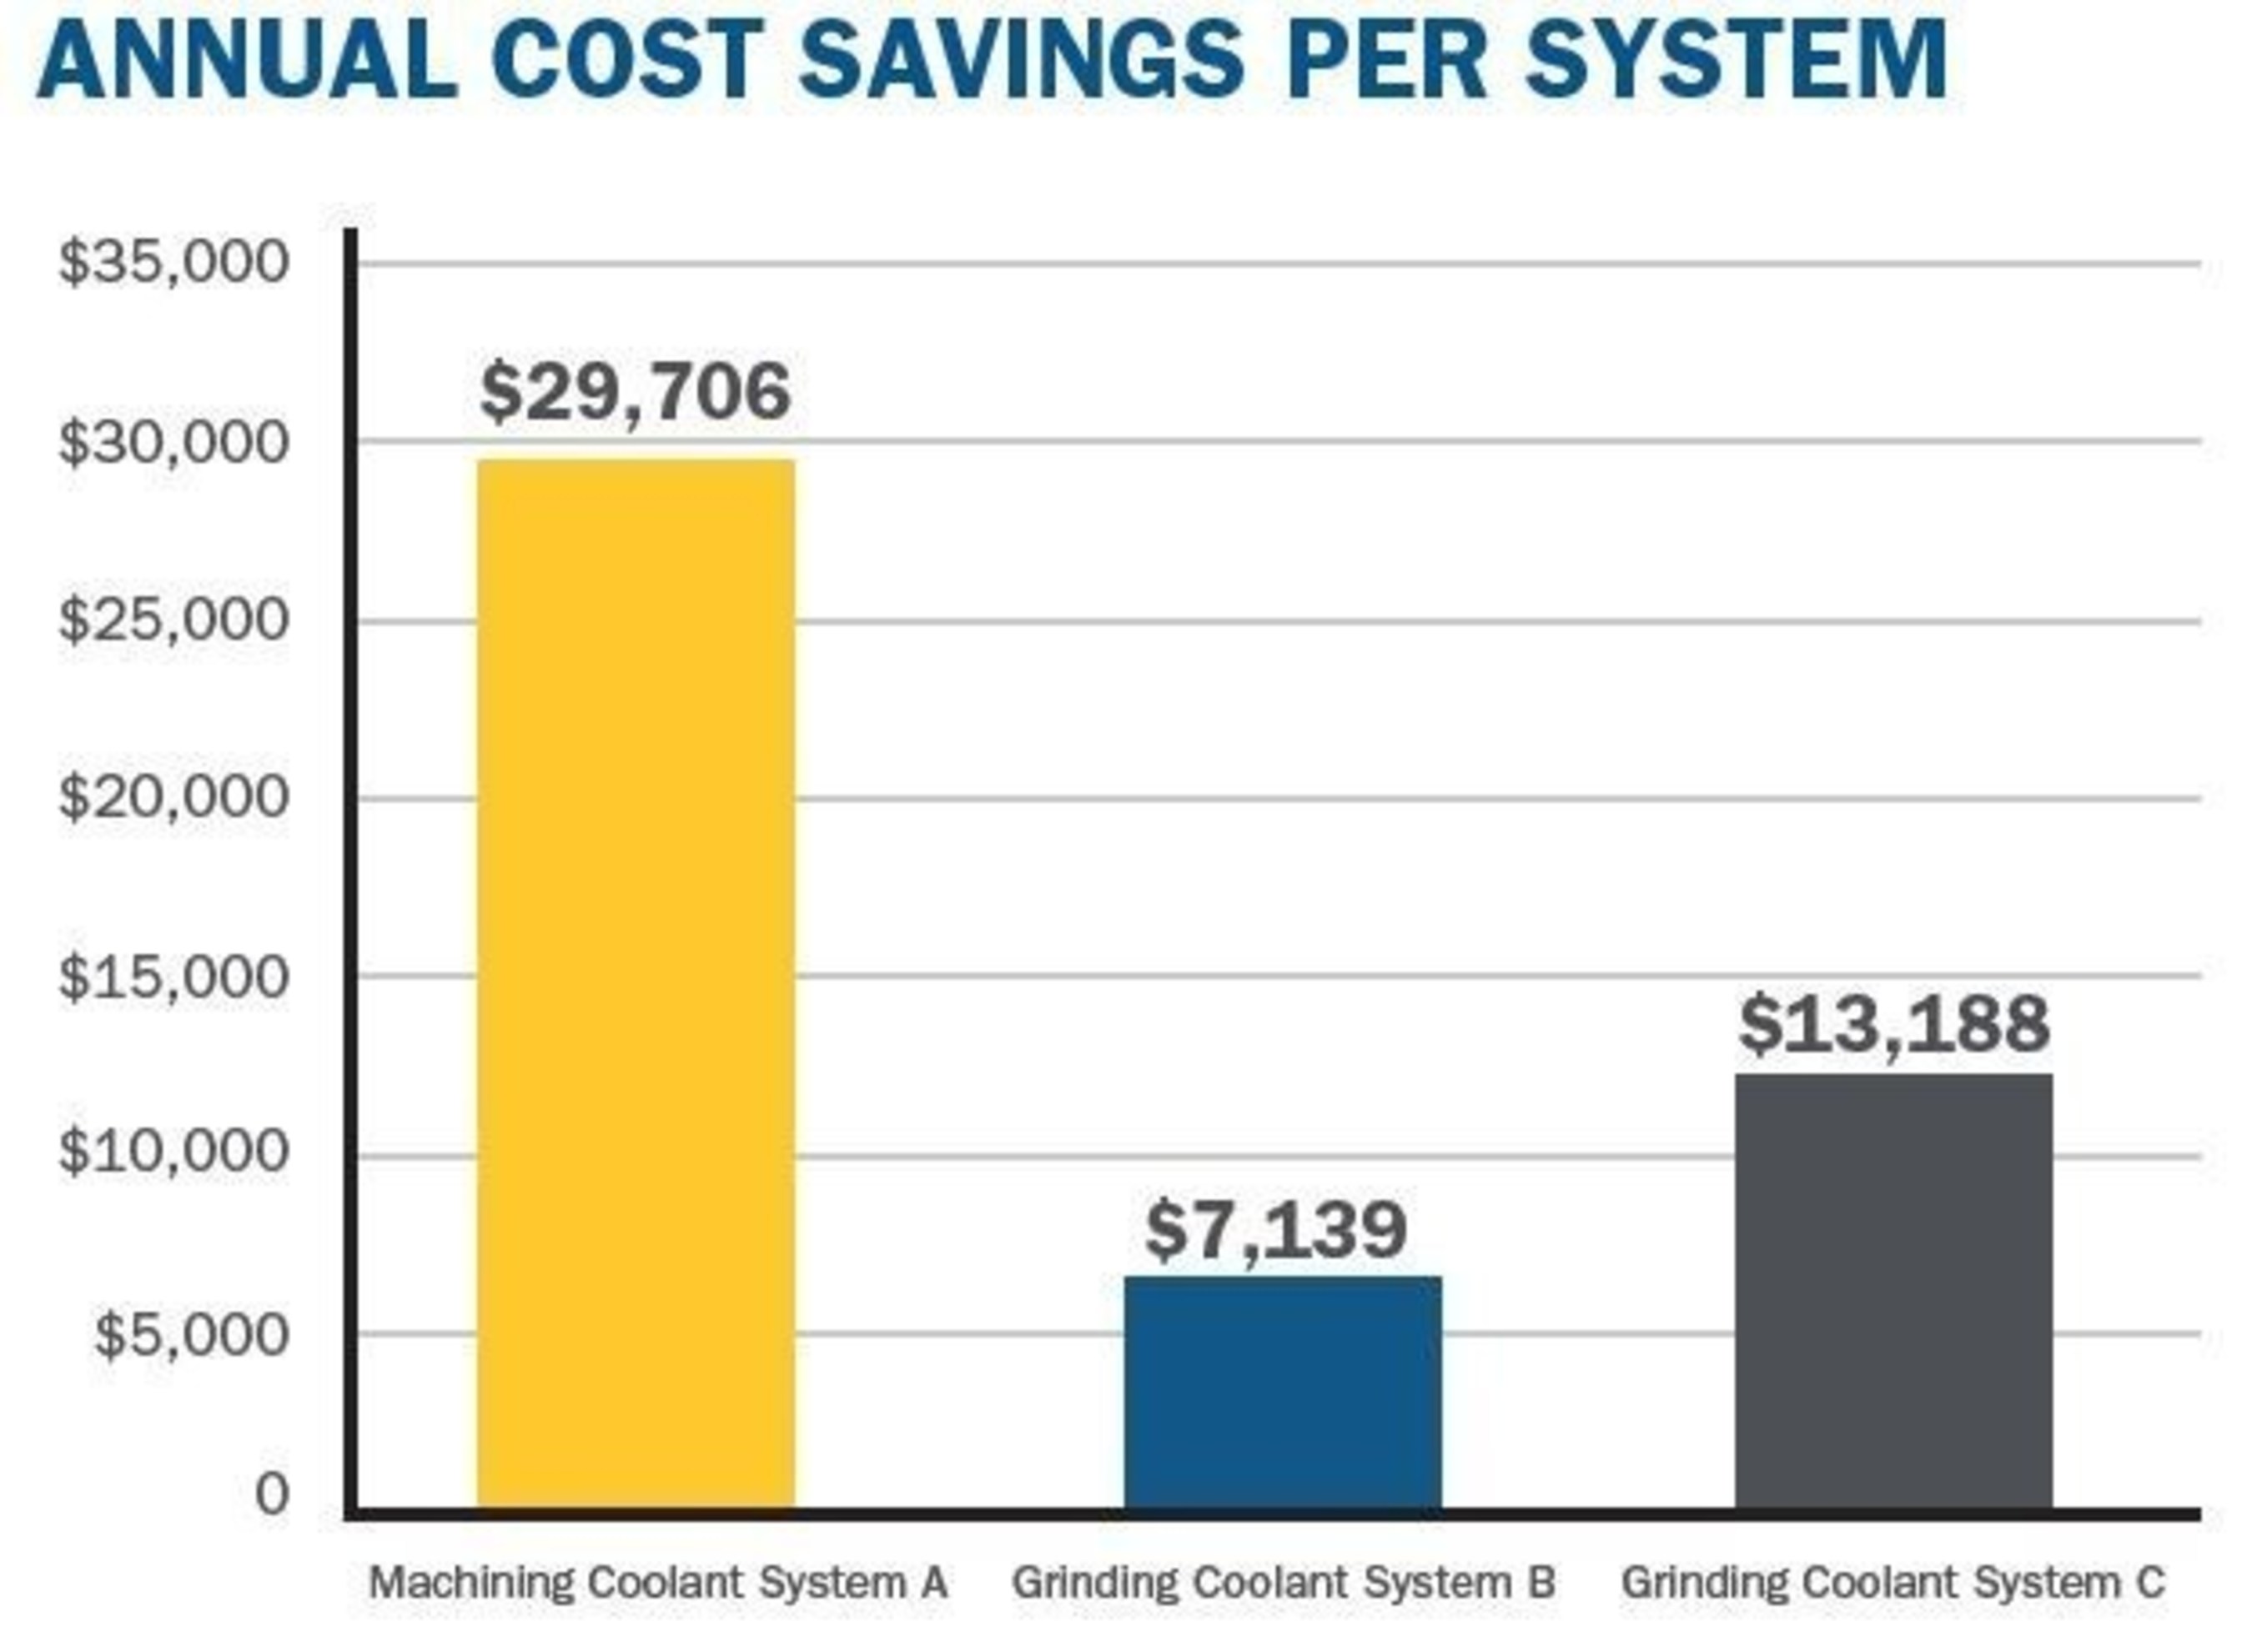 Total annual cost savings of $50,033 for all three systems